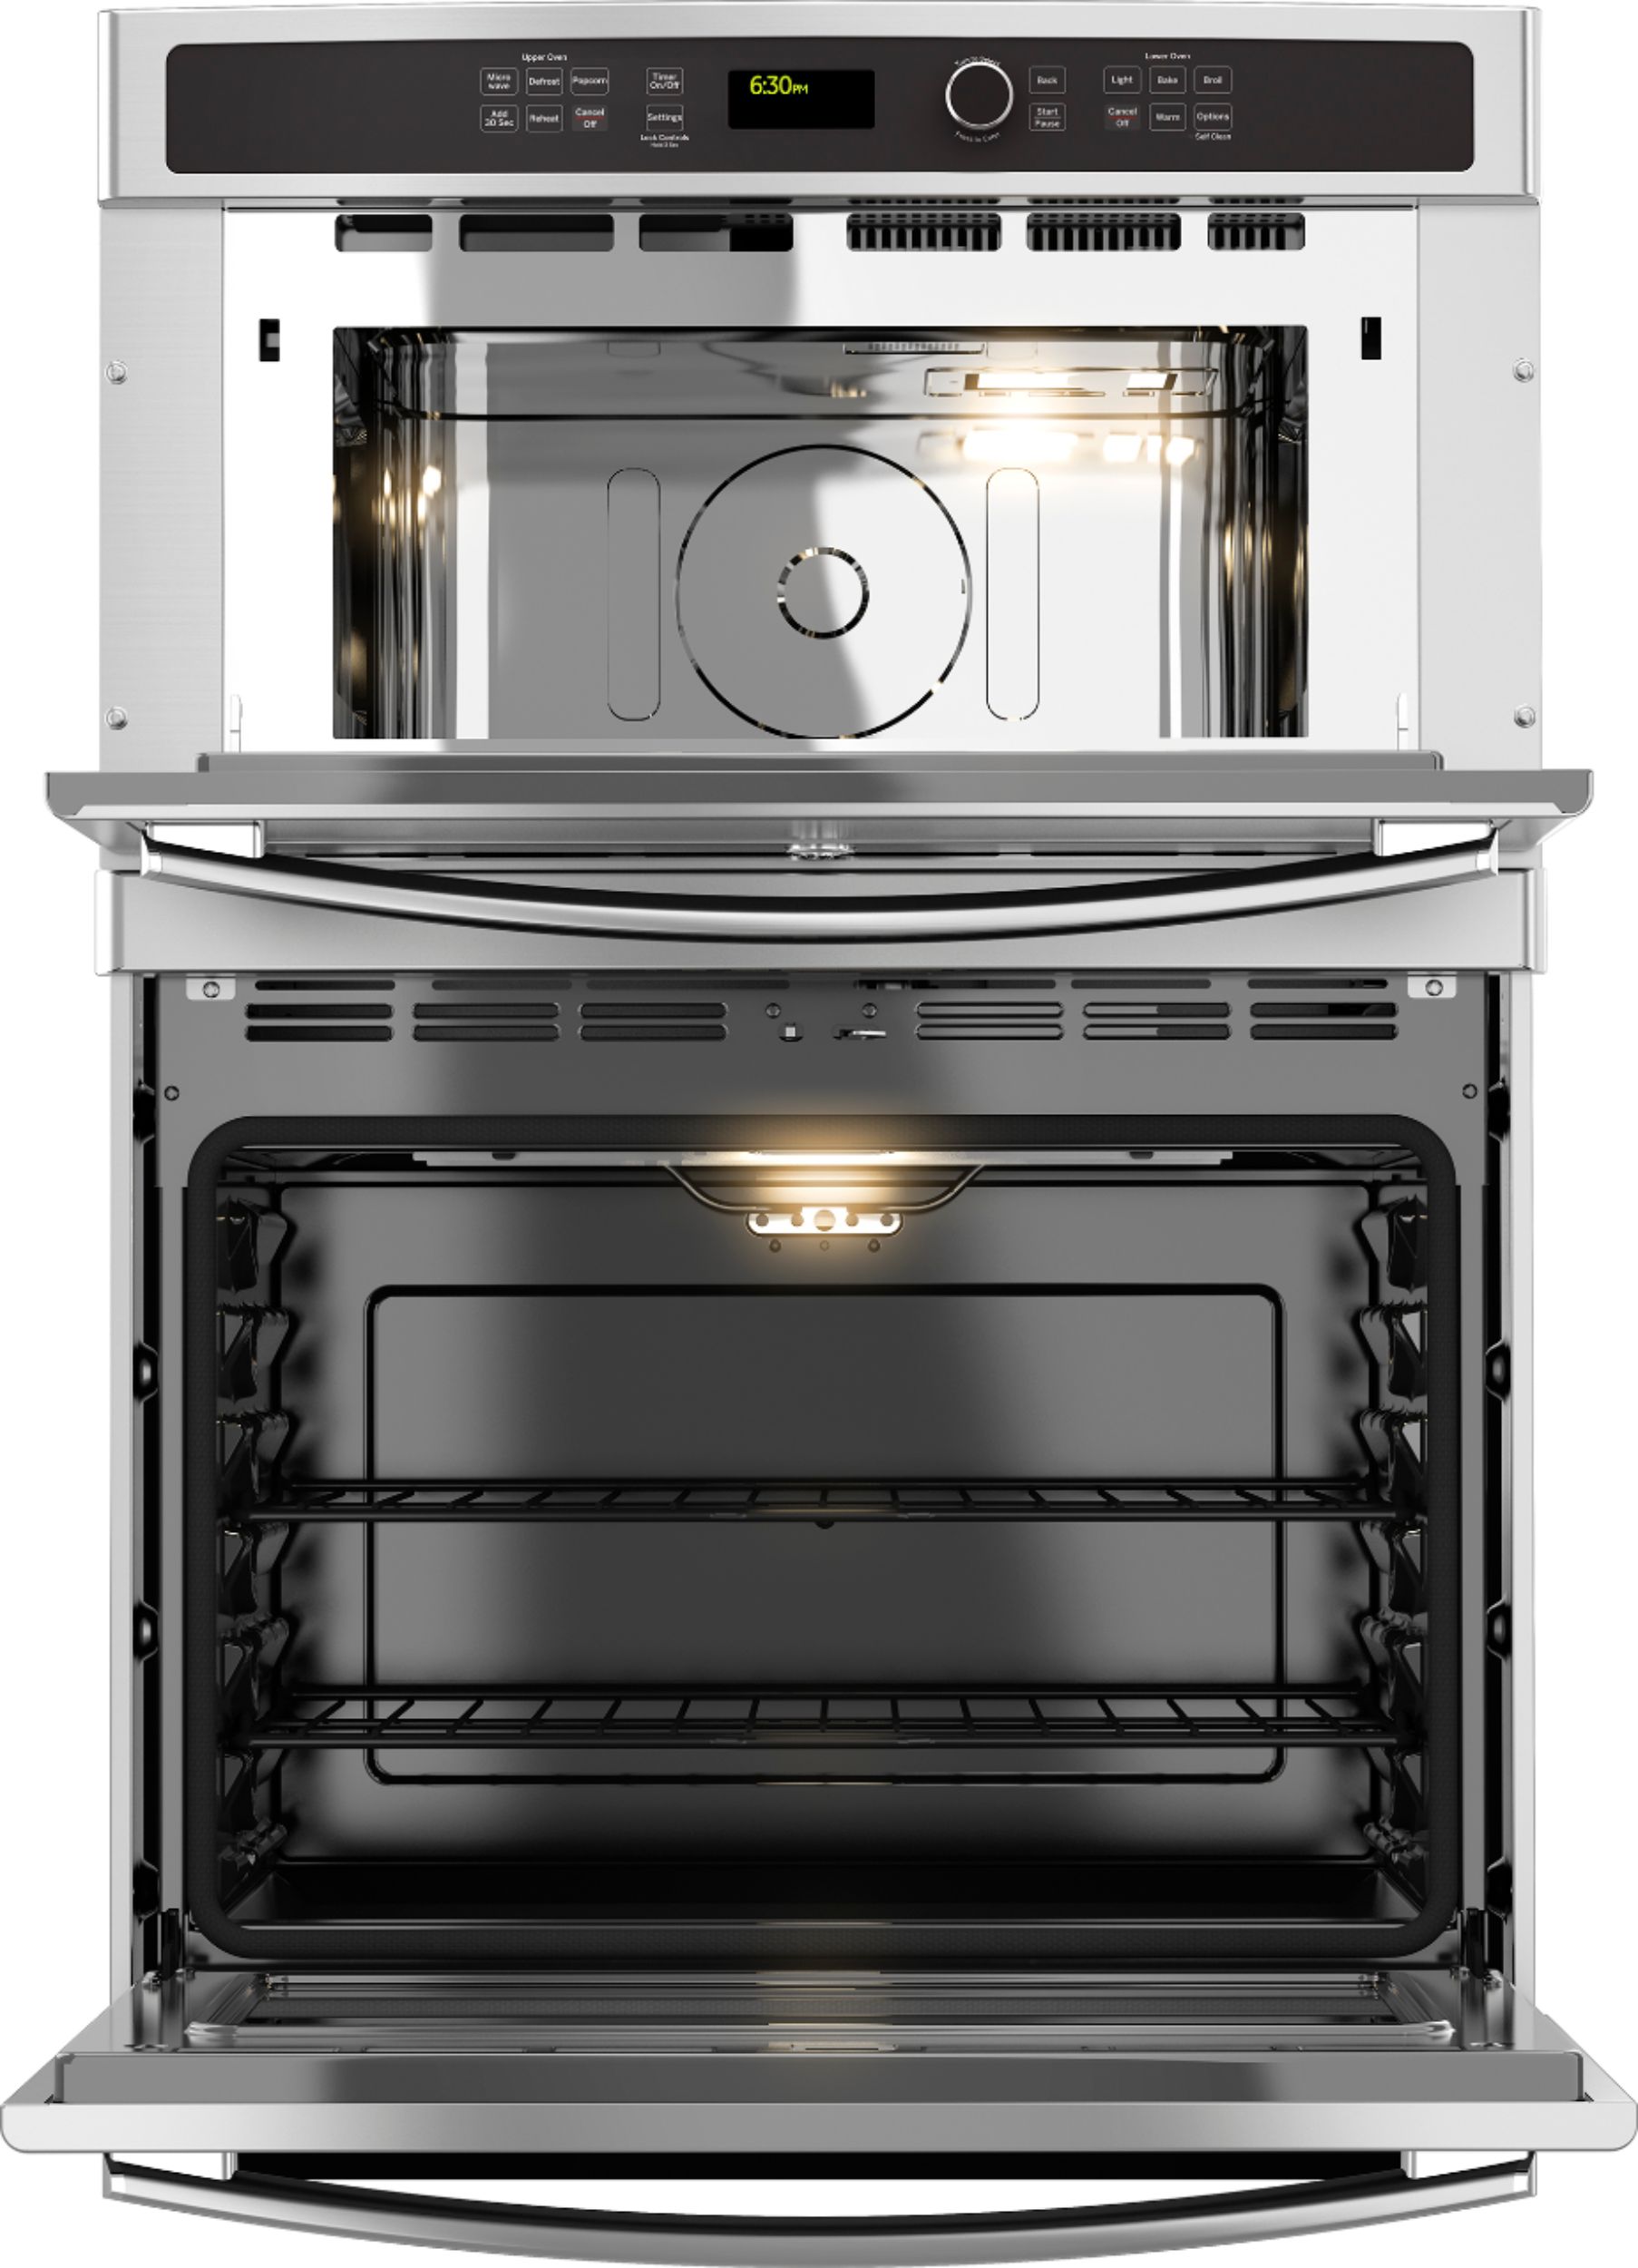 Angle View: Whirlpool - 27" Single Electric Wall Oven with Built-In Microwave - Stainless Steel